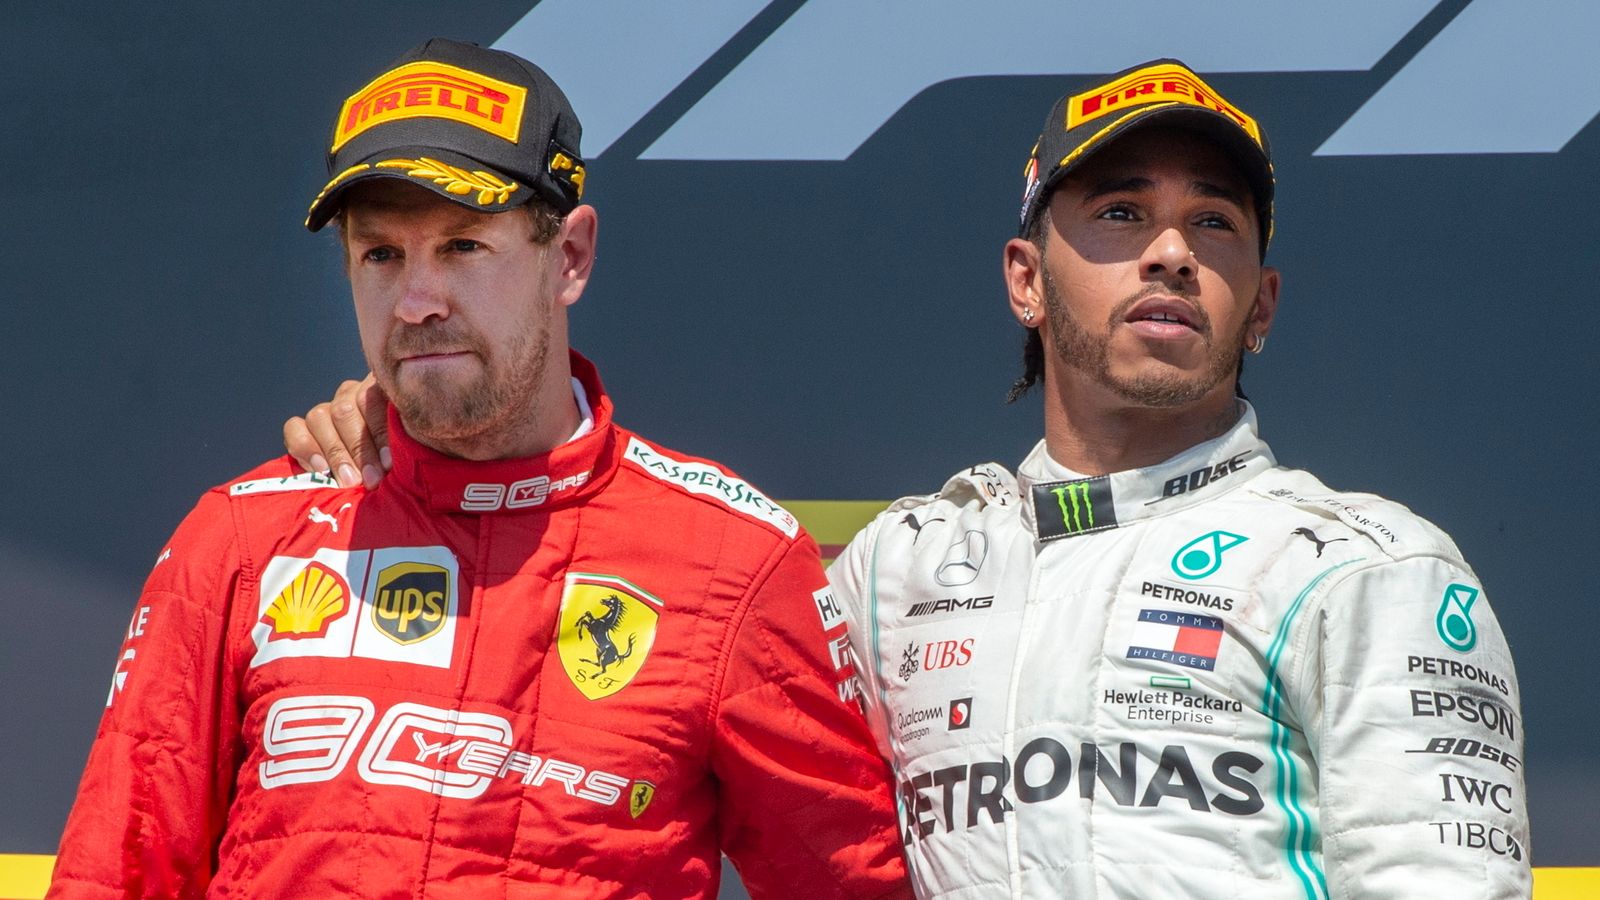 Canadian GP: A look back at Lewis Hamilton’s controversial battle with Sebastian Vettel and Jenson Button’s win in the wet